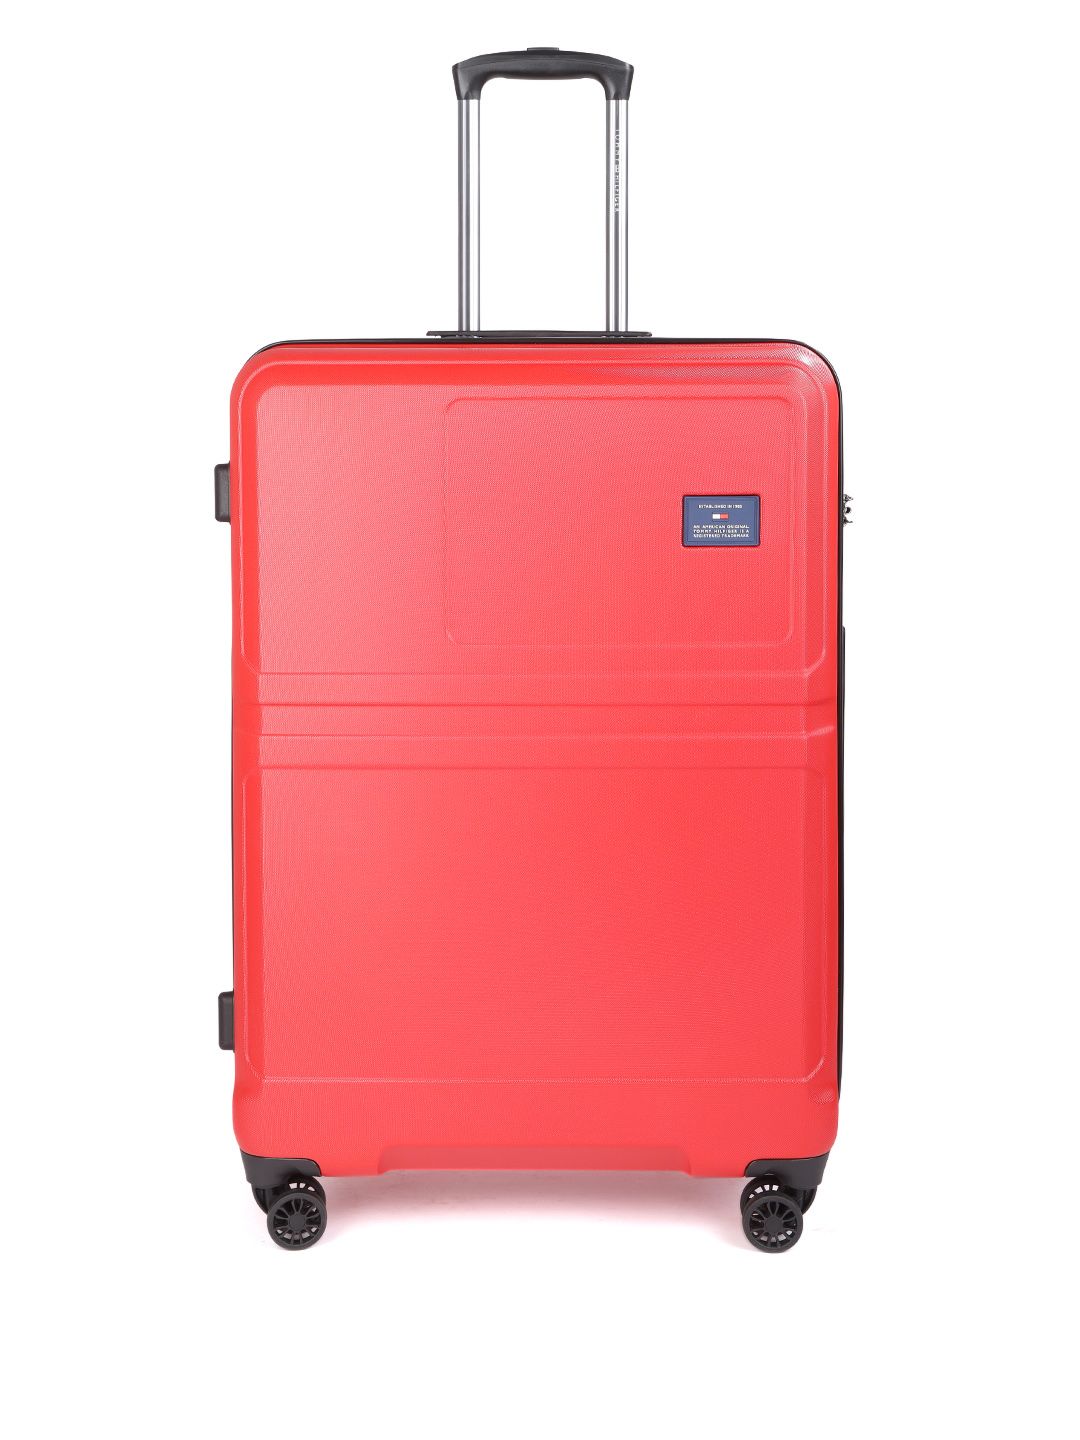 Tommy Hilfiger Unisex Red Hard Luggage 360-Degree Skate 4-Wheel Large Trolley Suitcase Price in India